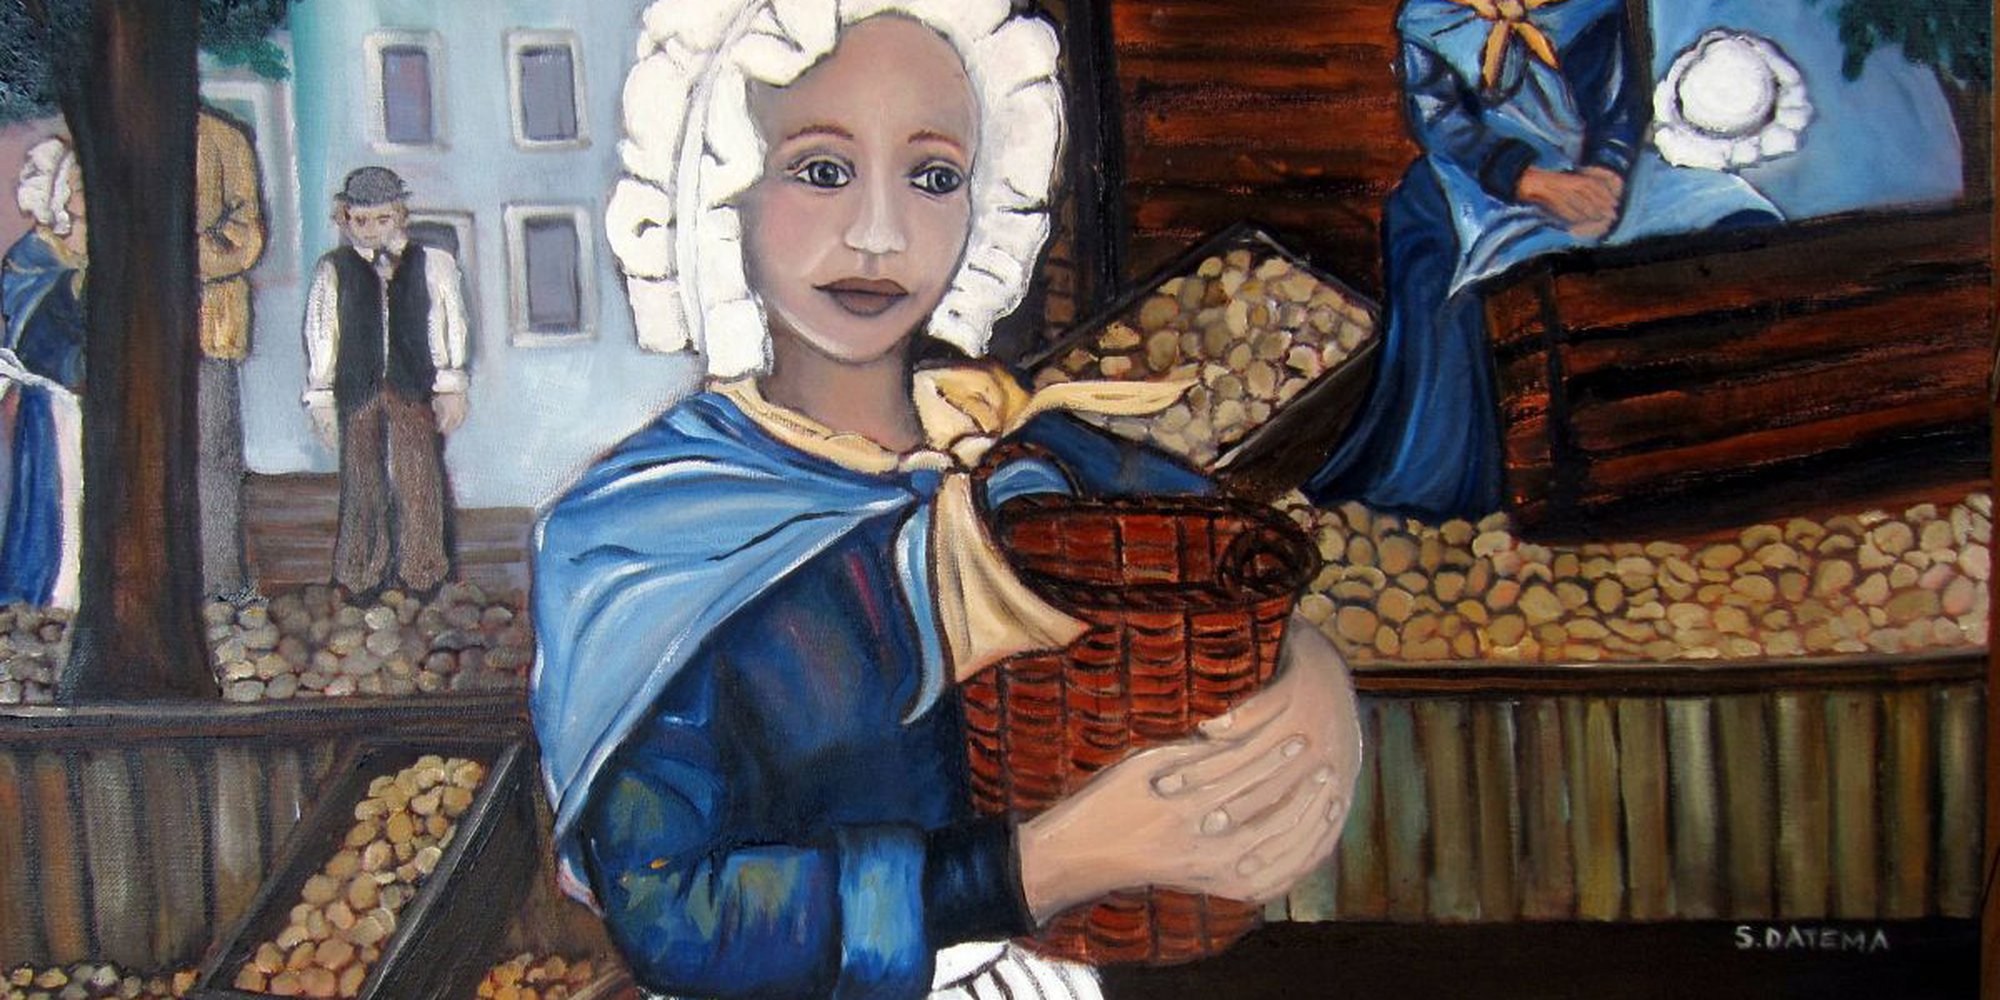 Art of the Day: "Suzette Datema, The Girl With The Mona Lisa Smile, 2013" by Suzette Datema